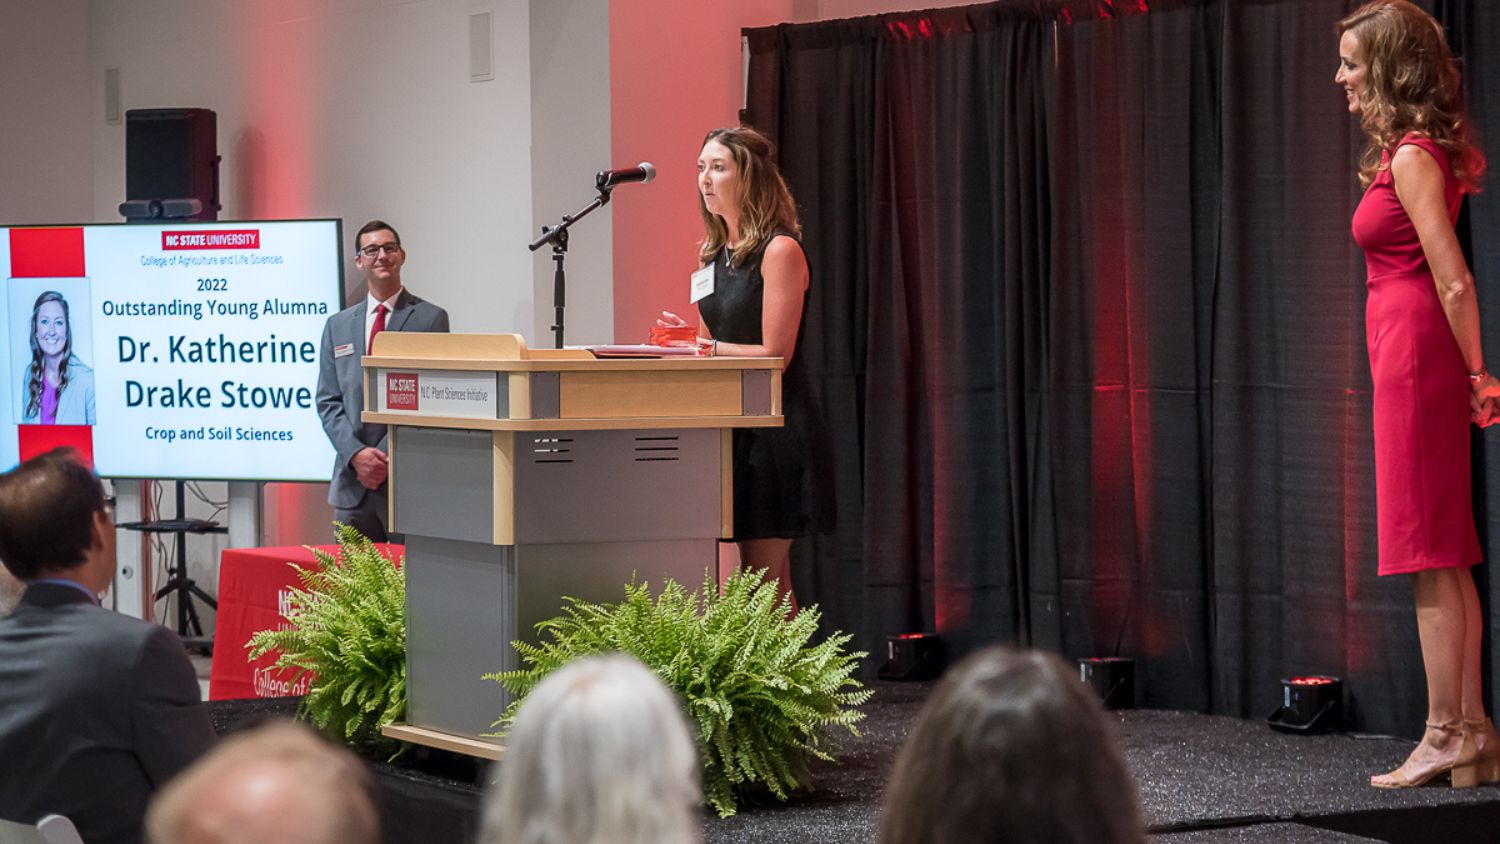 Stowe received a 2022 Outstanding Young Alumna award from the Department of Crop and Soil Sciences.